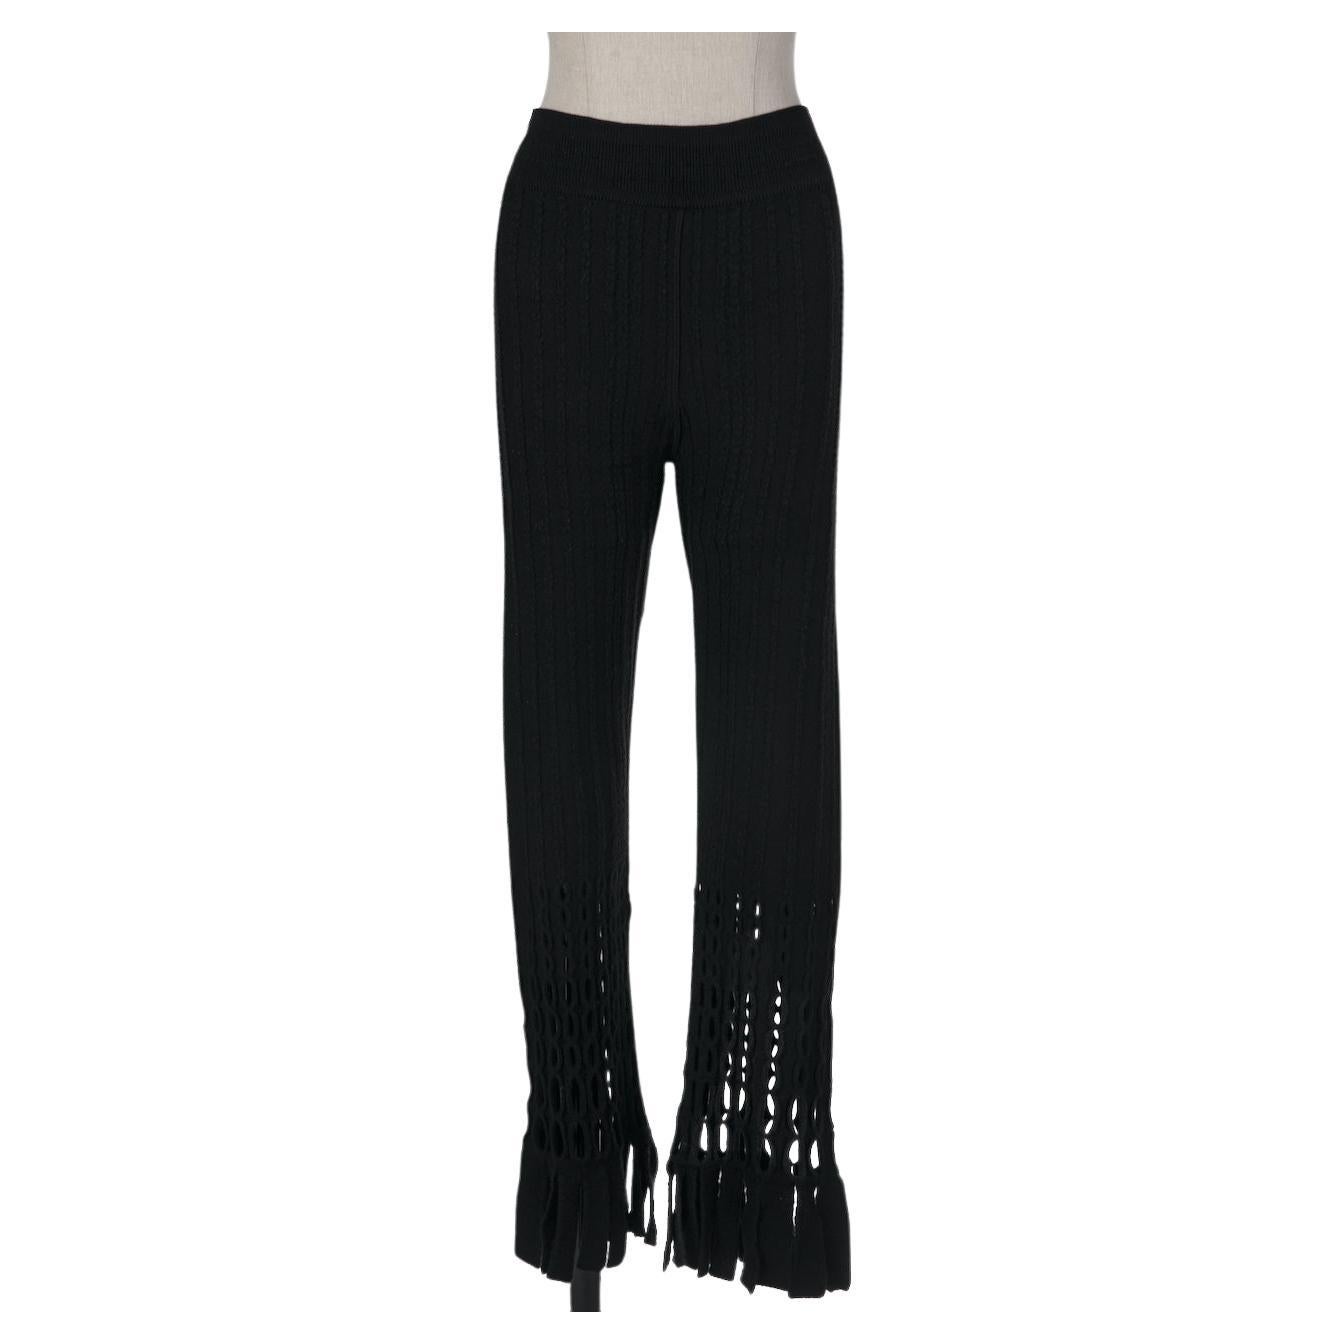 Here we have a truly important and documented piece of fashion history by AZZEDINE ALAÏA from his Fall 1993 collection: the black perforated boiled wool-blend pants with fringed finishings. They were worn by super model Nadja Auermann for an